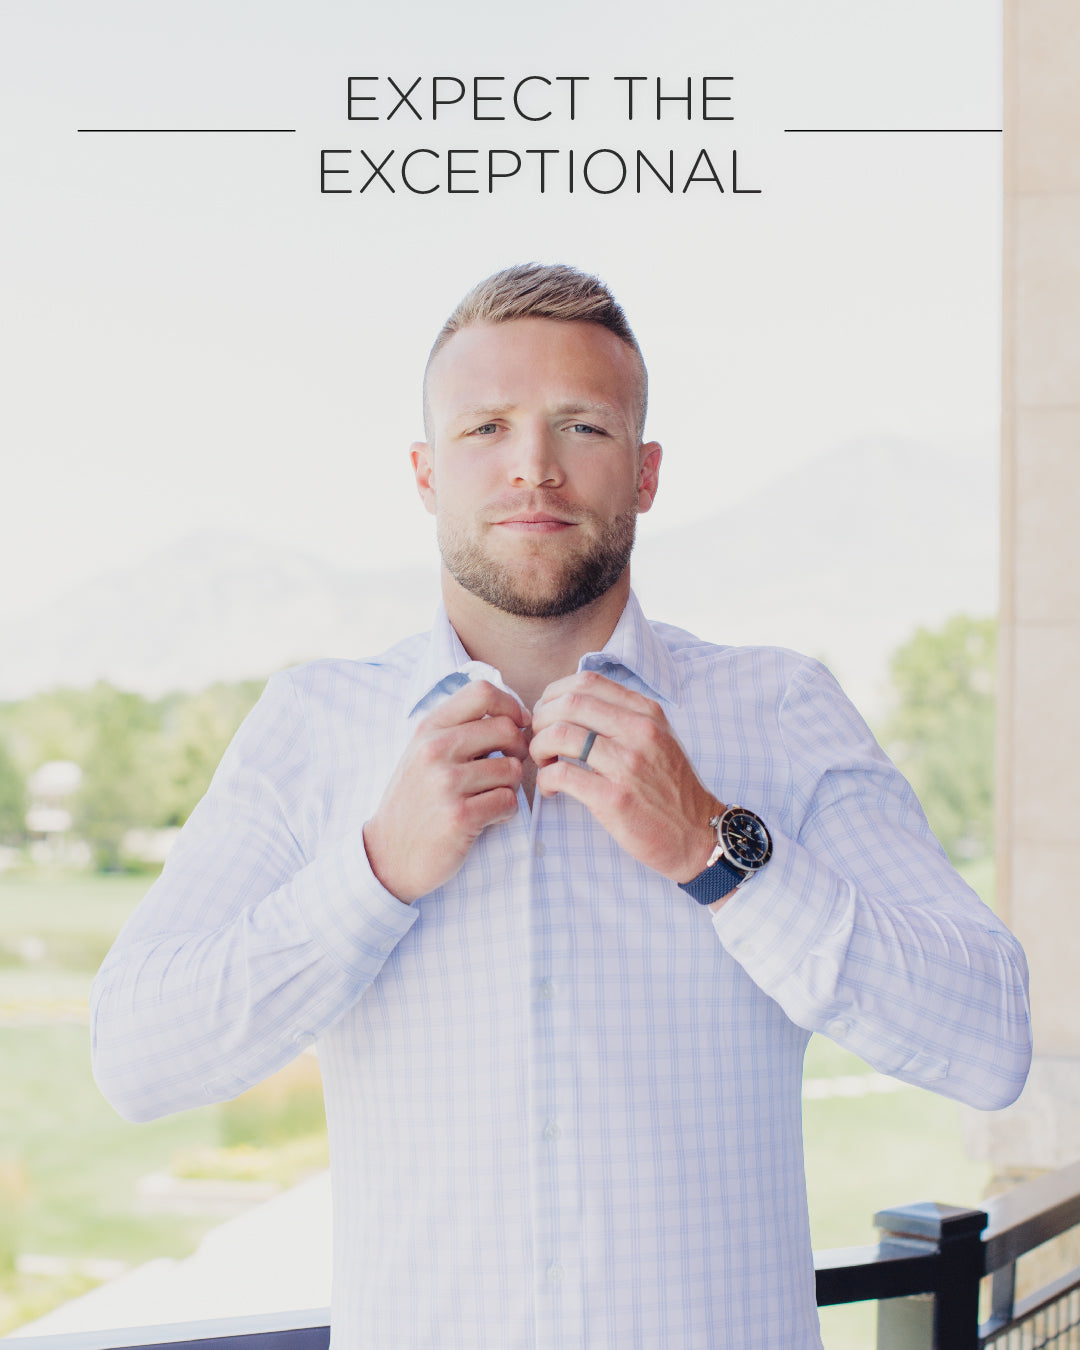 Taysom hill wearing dress shirt. Text above says expect the exceptional